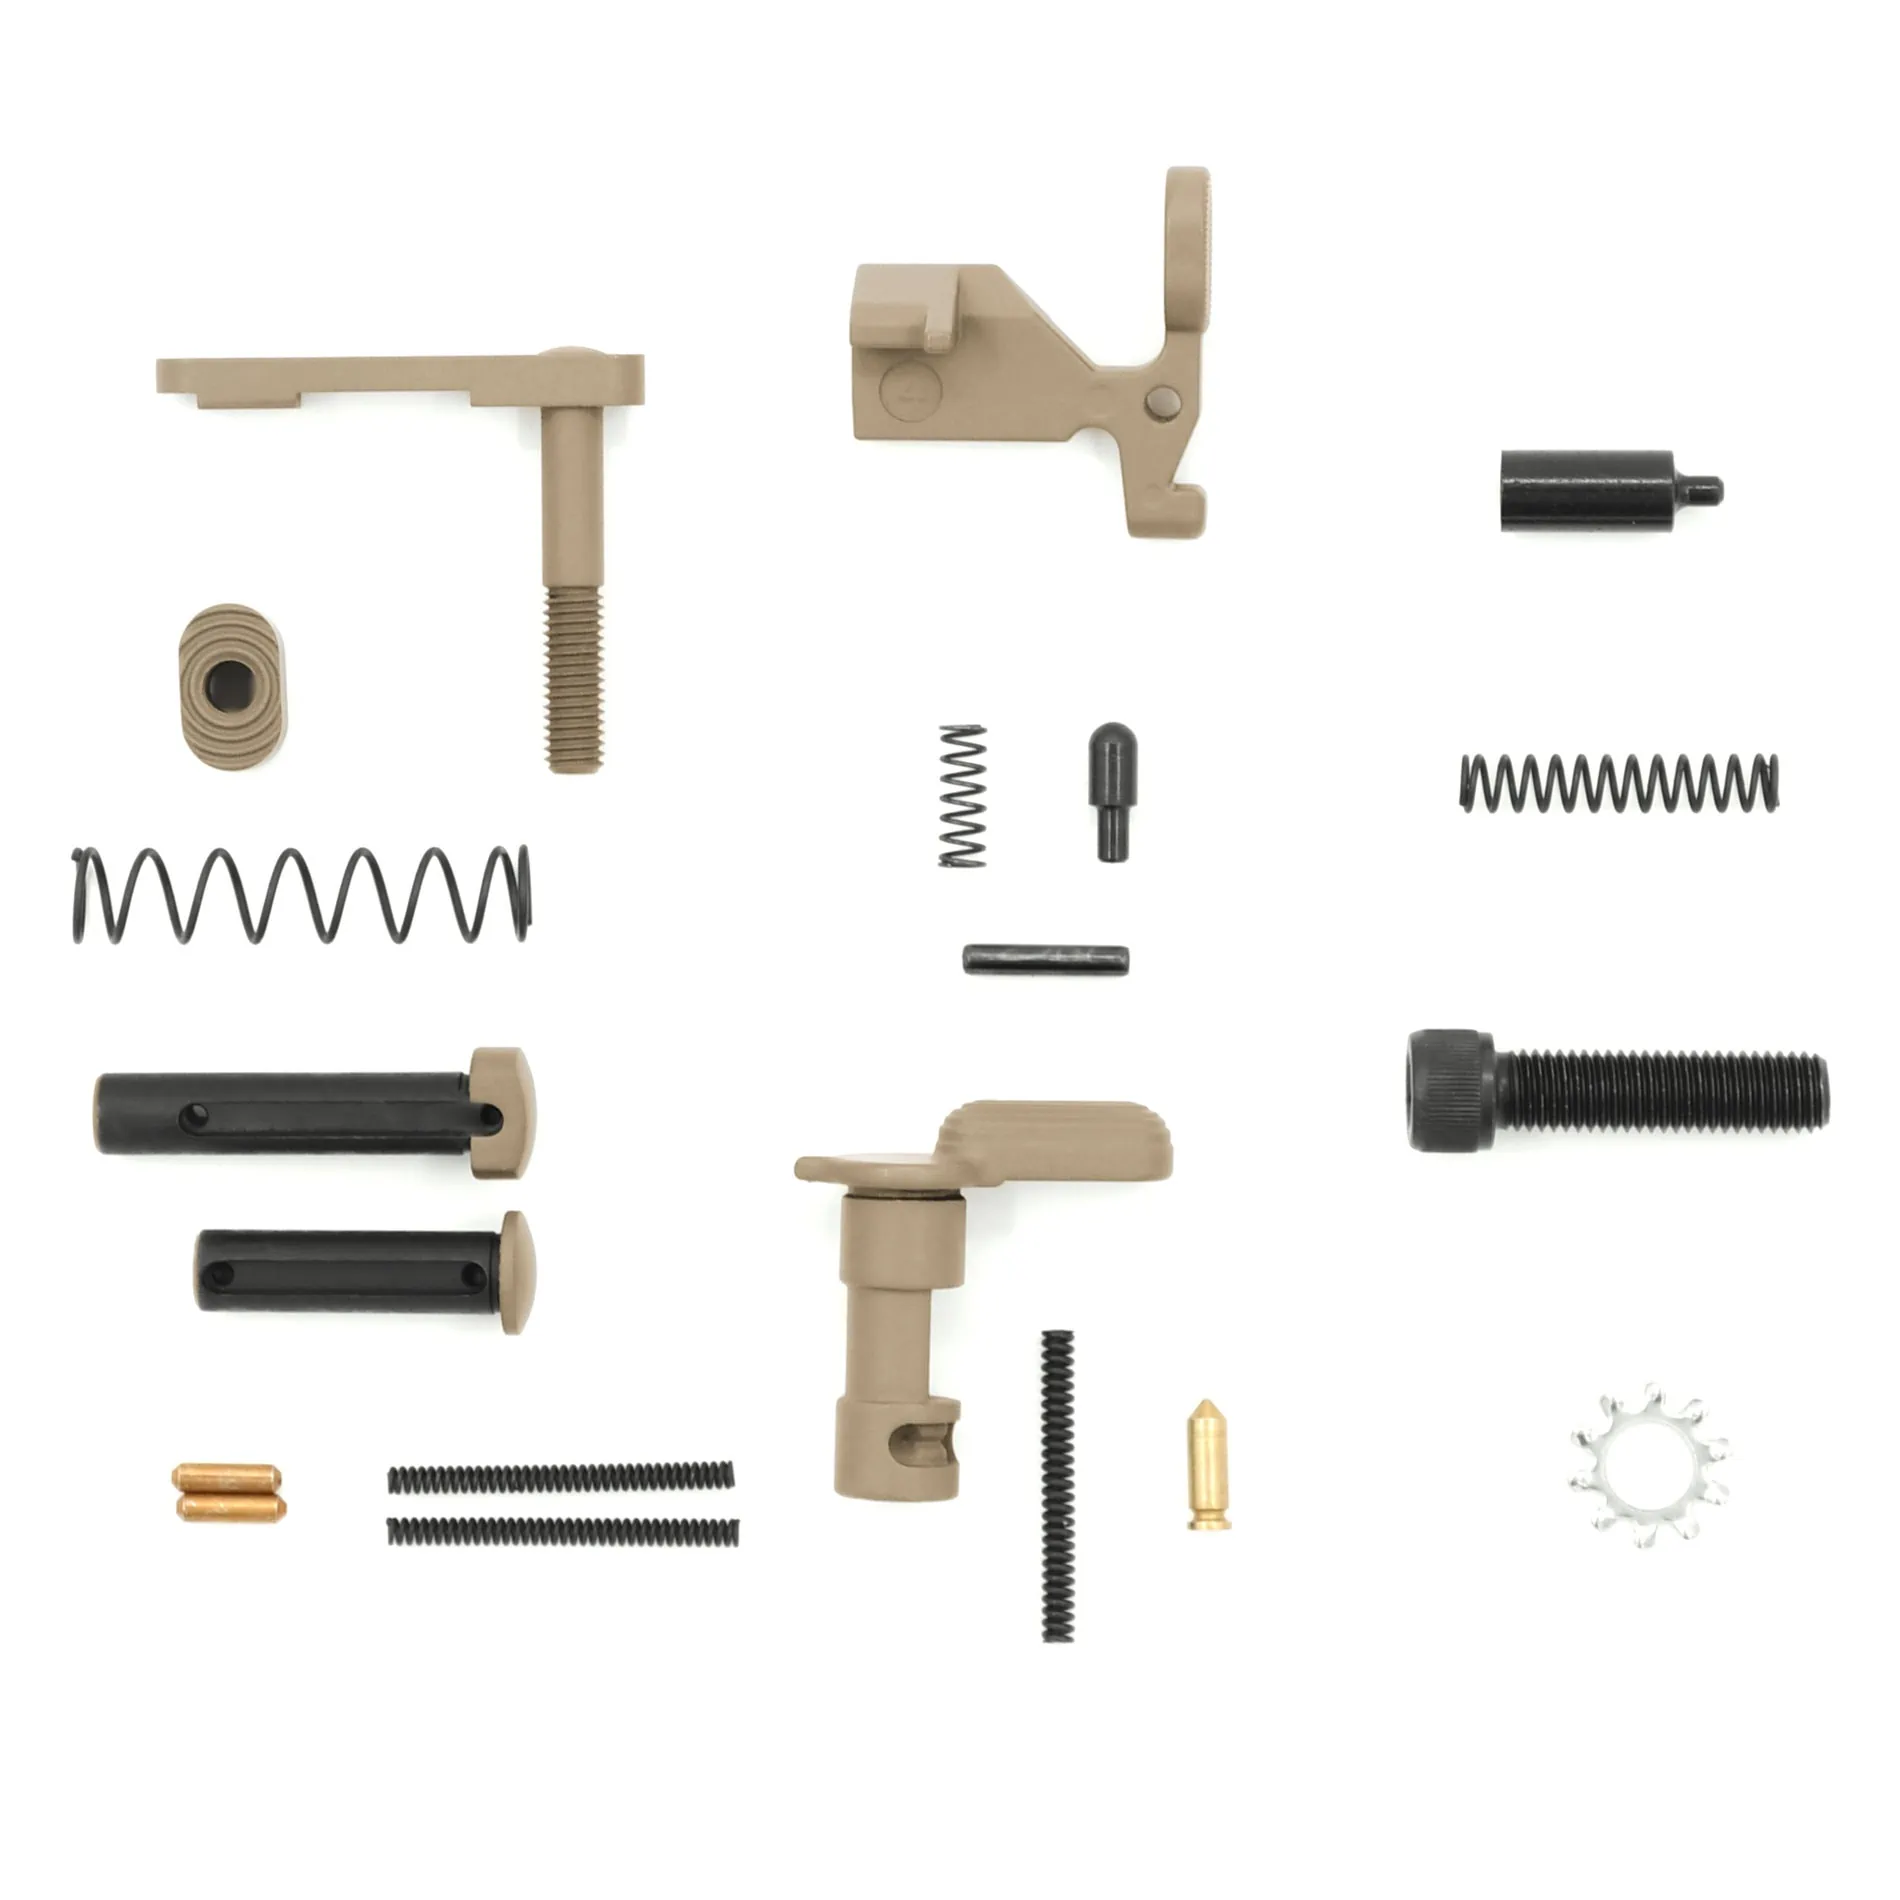 AT3™ Pro-Builder™ AR-15 Lower Parts Kit – No Grip or Trigger Assembly